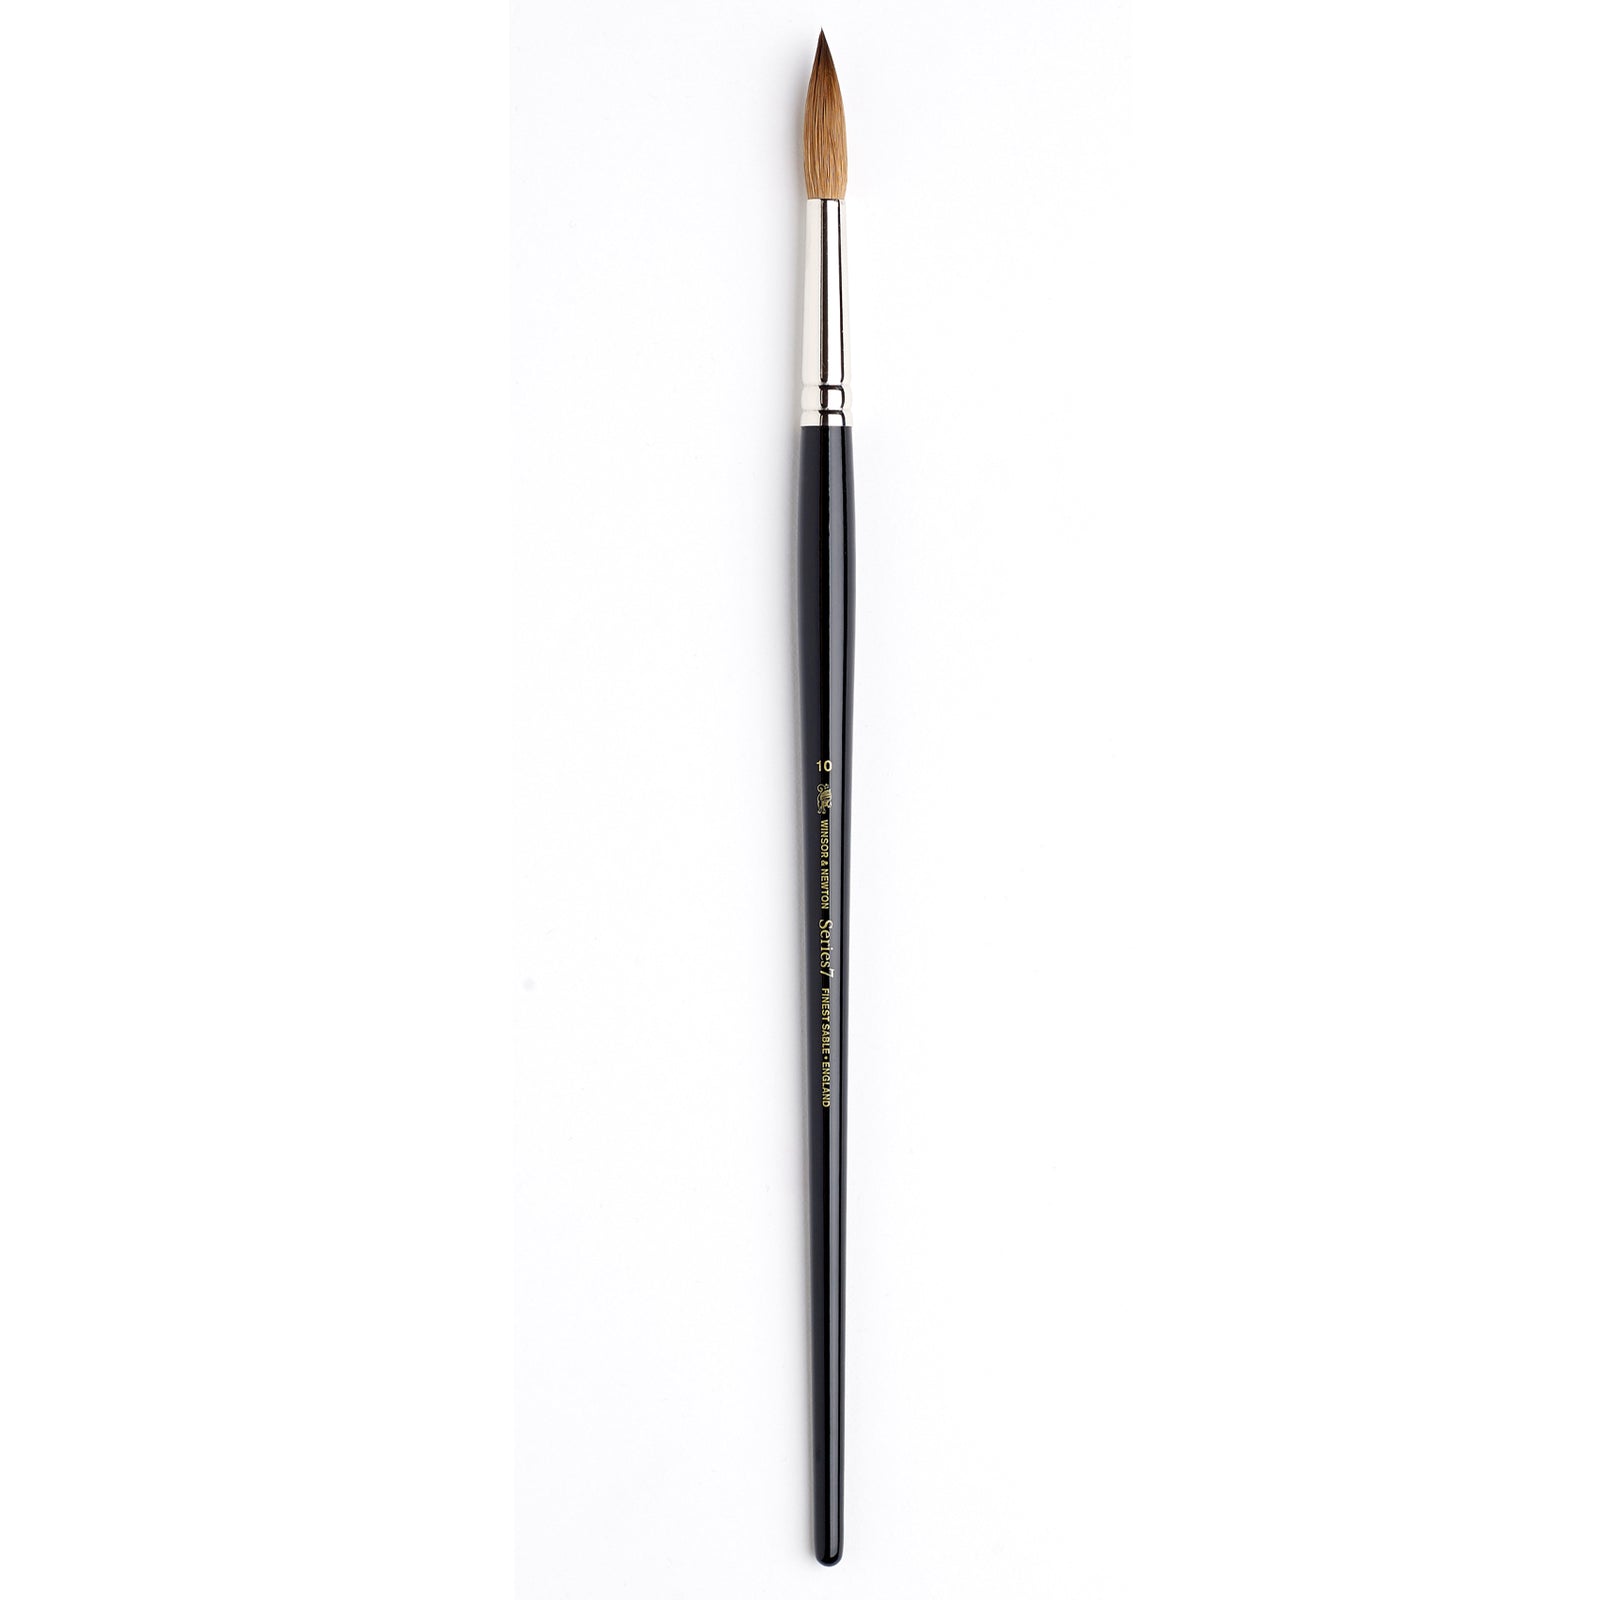 Winsor & Newton Professional Watercolour Sable Brushes